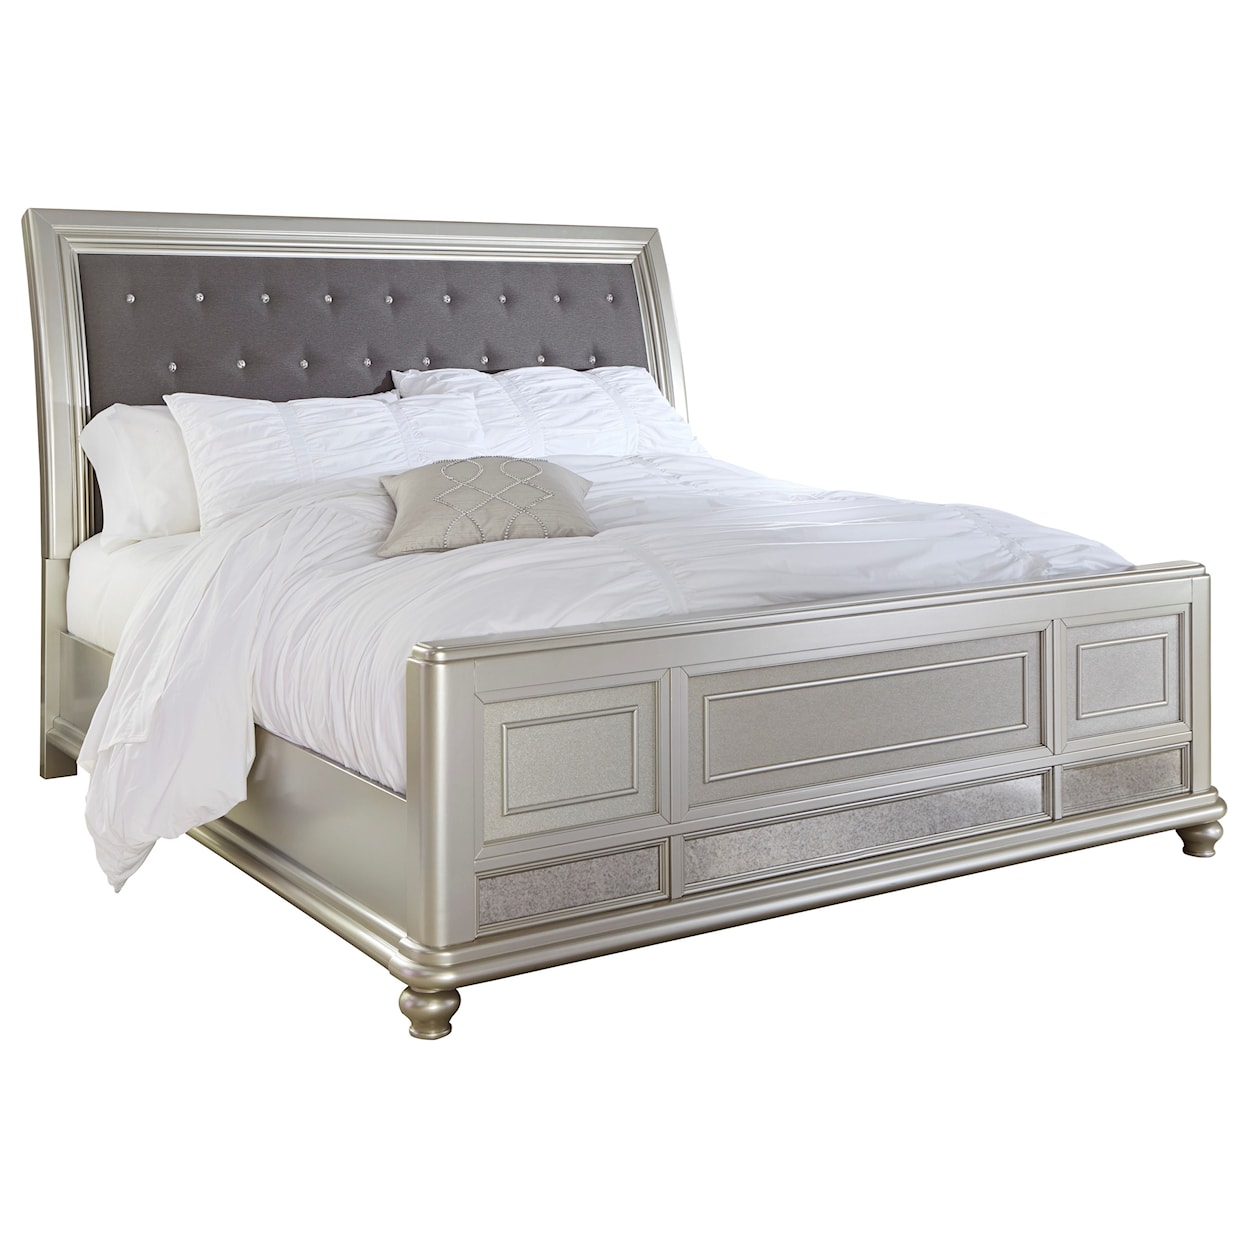 Signature Design by Ashley Coralayne Queen Bed with Upholstered Sleigh Headboard